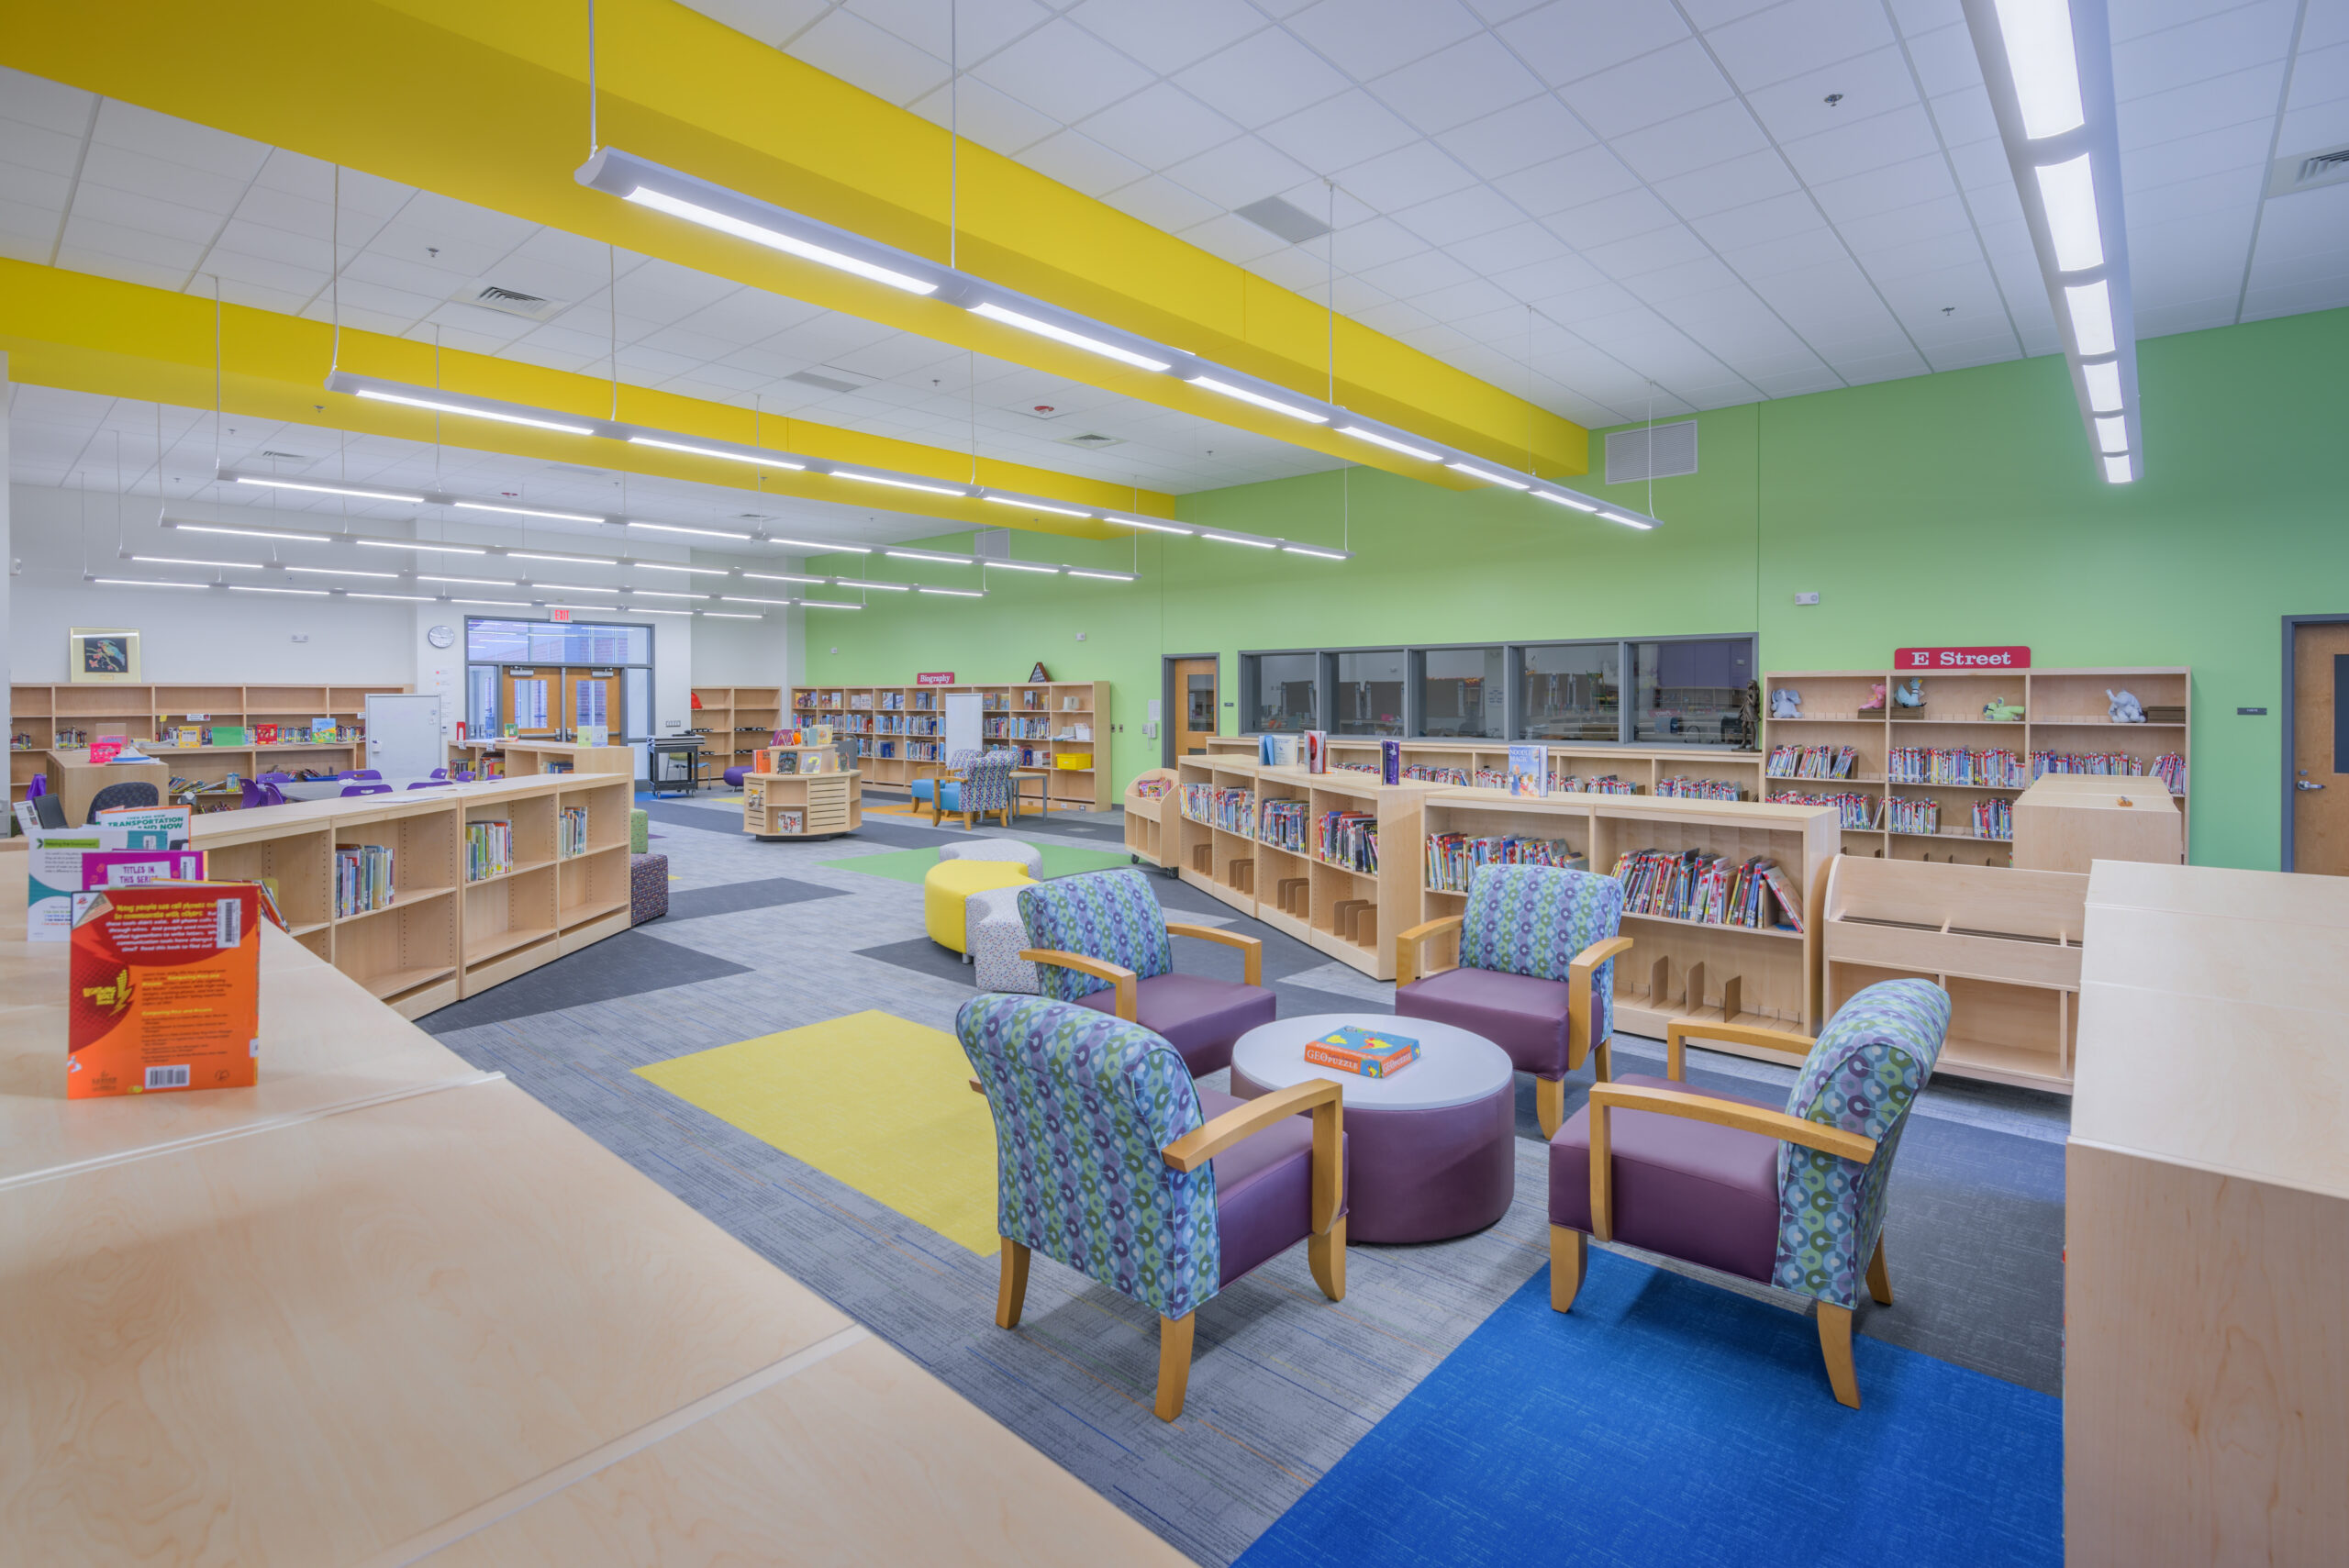 Barton Pond Elementary School Media Center Book Shelves with Books and Reading Spaces with Green Walls and a Color-Blocked Carpet